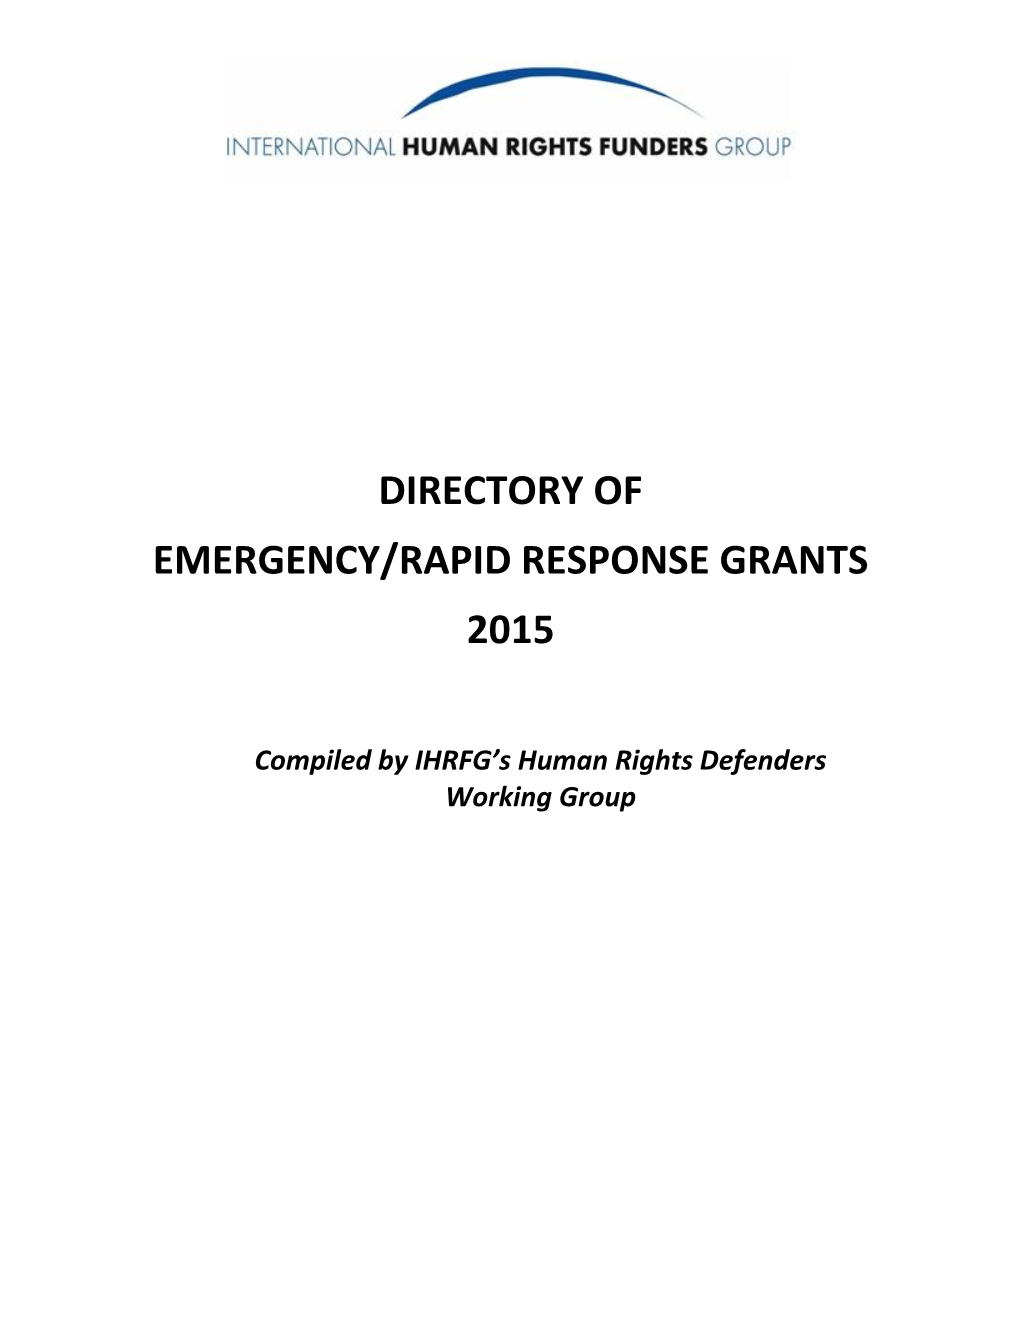 Directory of Emergency and Rapid Response Grants